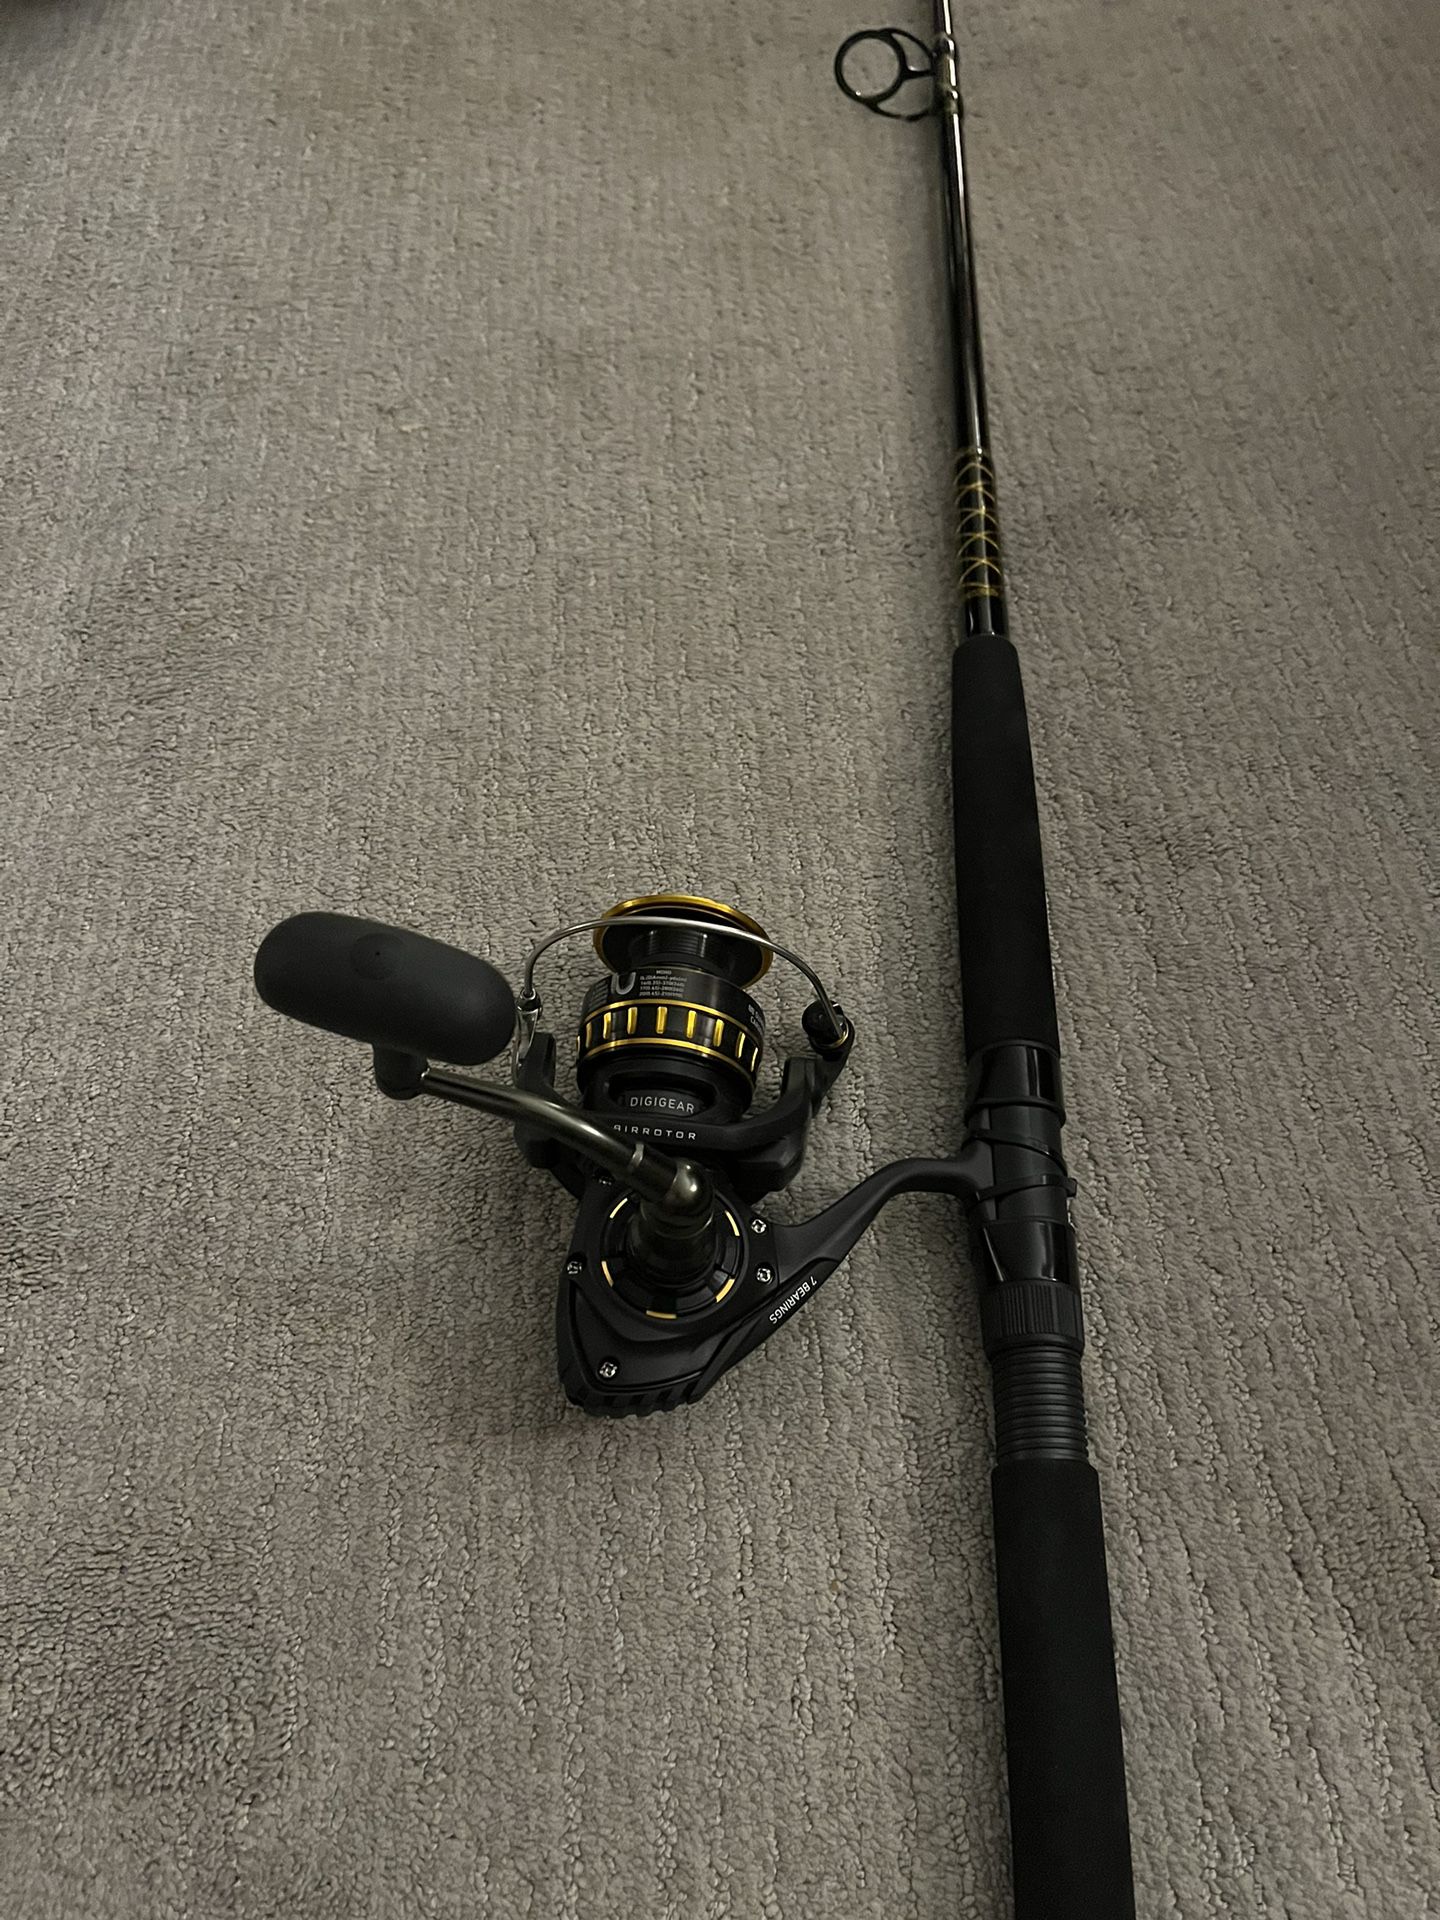 BG701MH - 7'0” MH Line: 15 - 30 Ibs/ BRAID 50 Ibs for Sale in